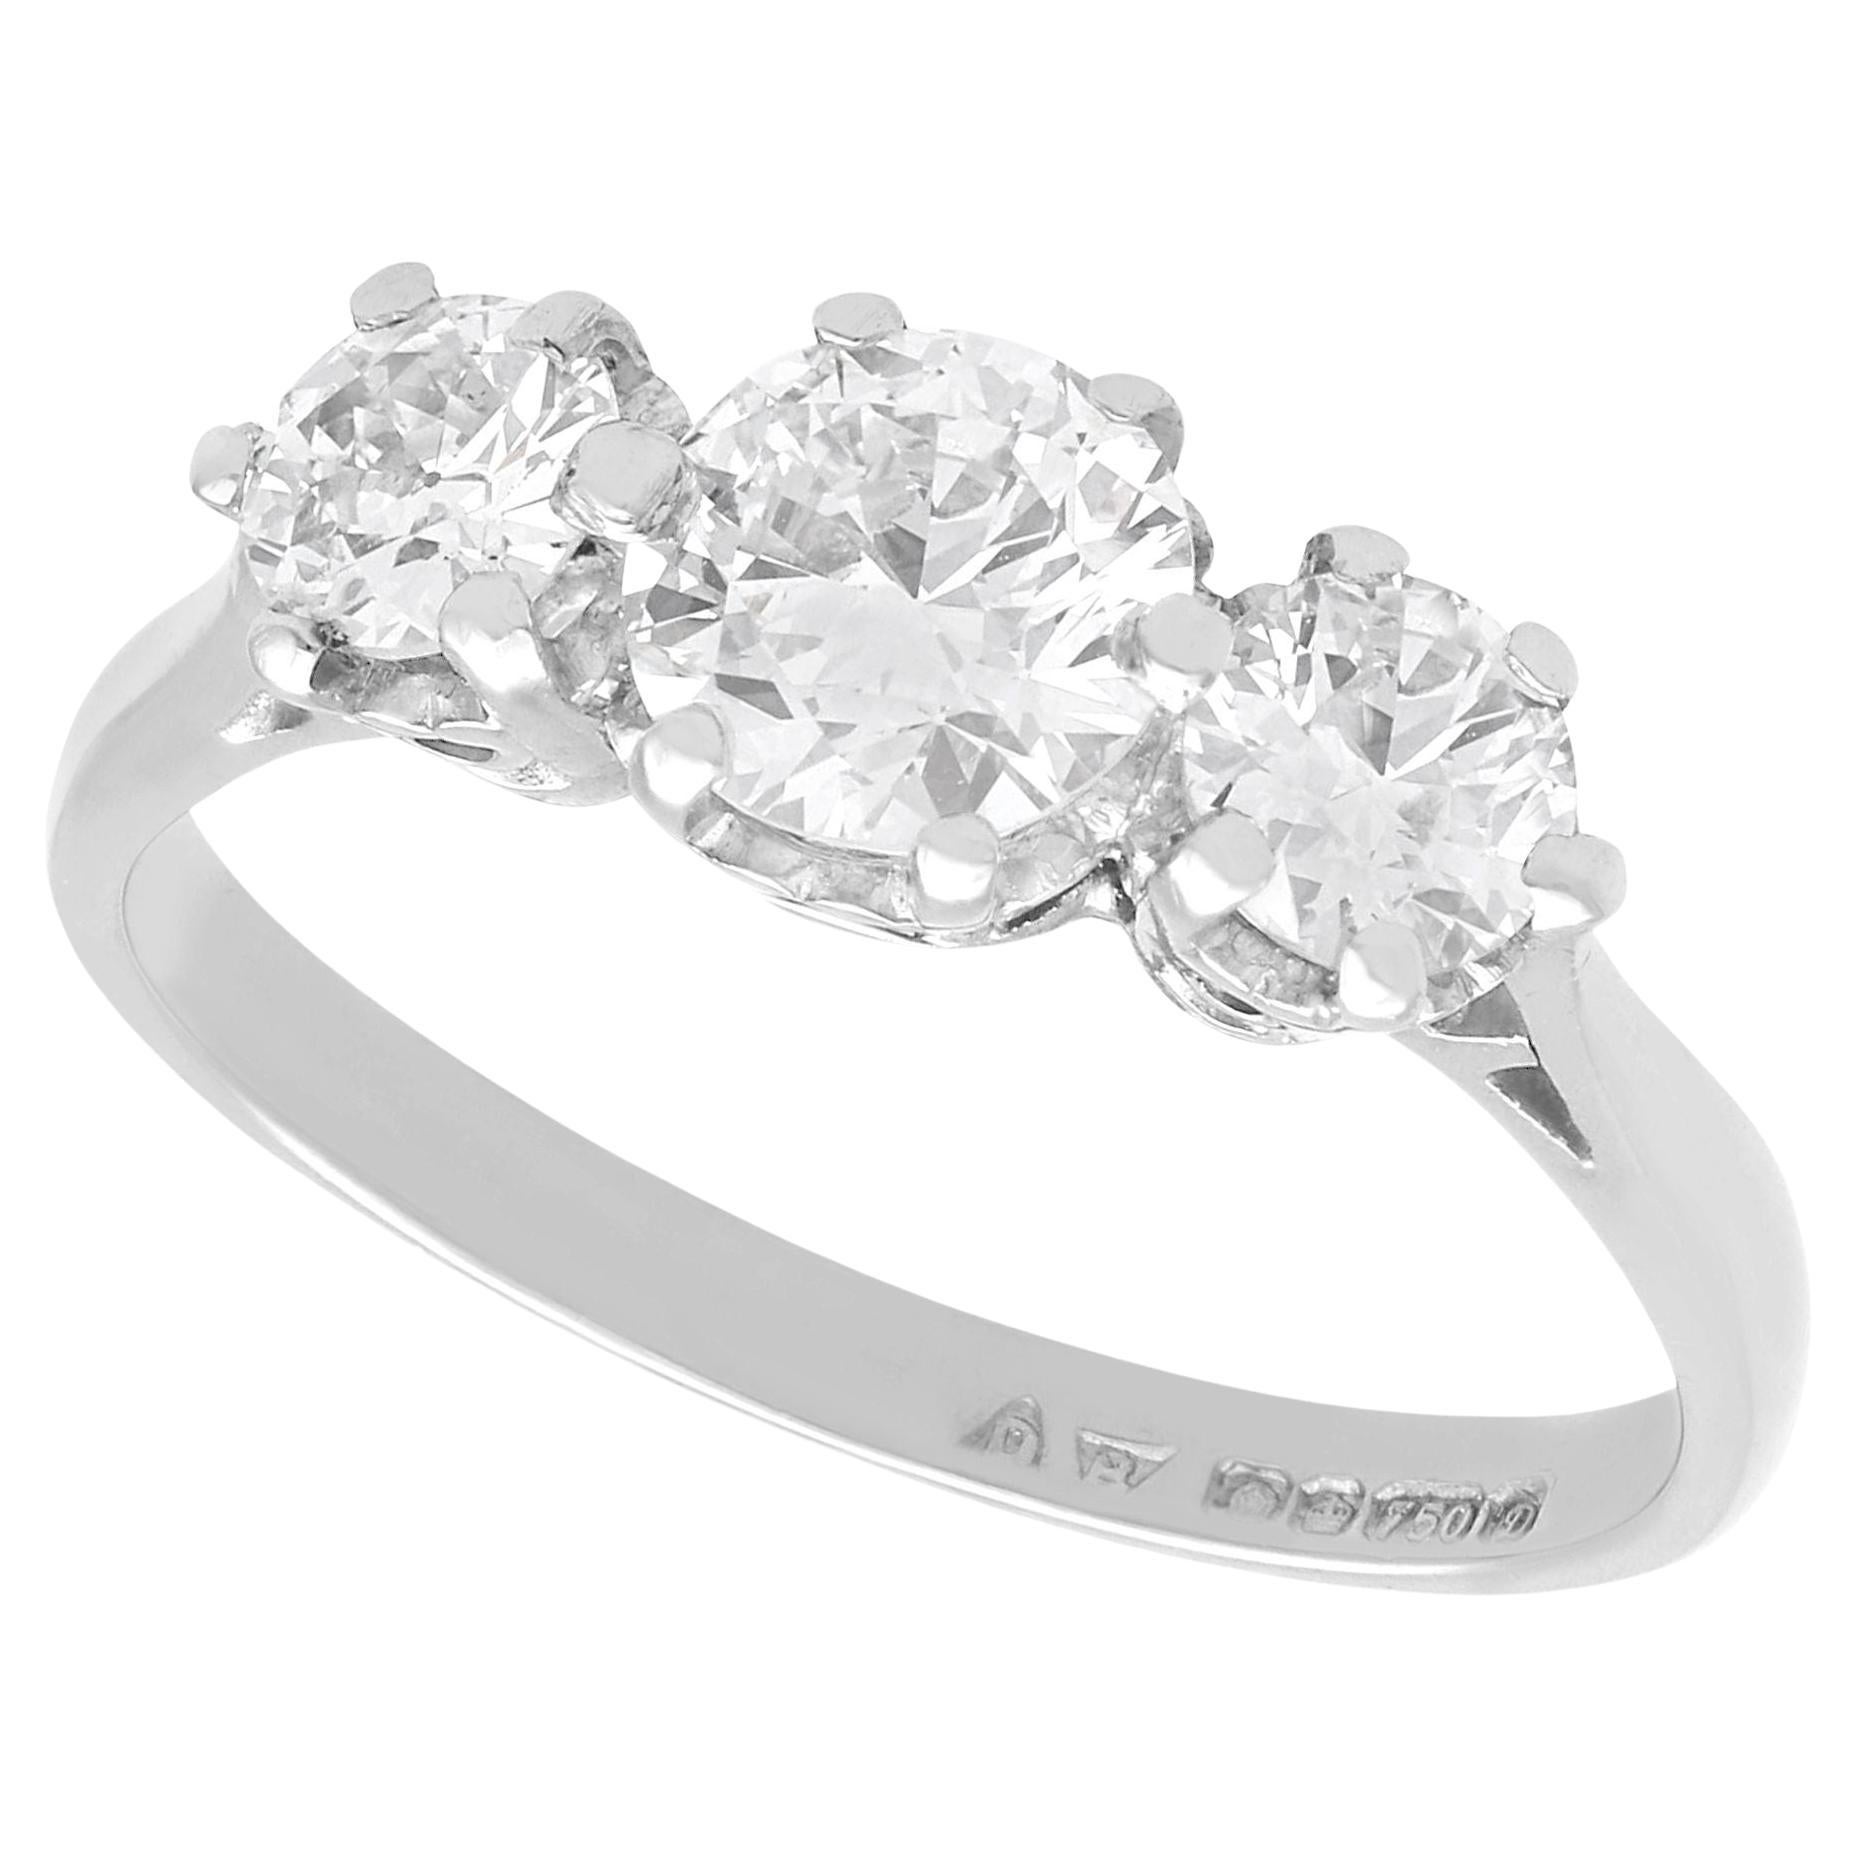 1.51 Carat Diamond and White Gold Trilogy Engagement Ring